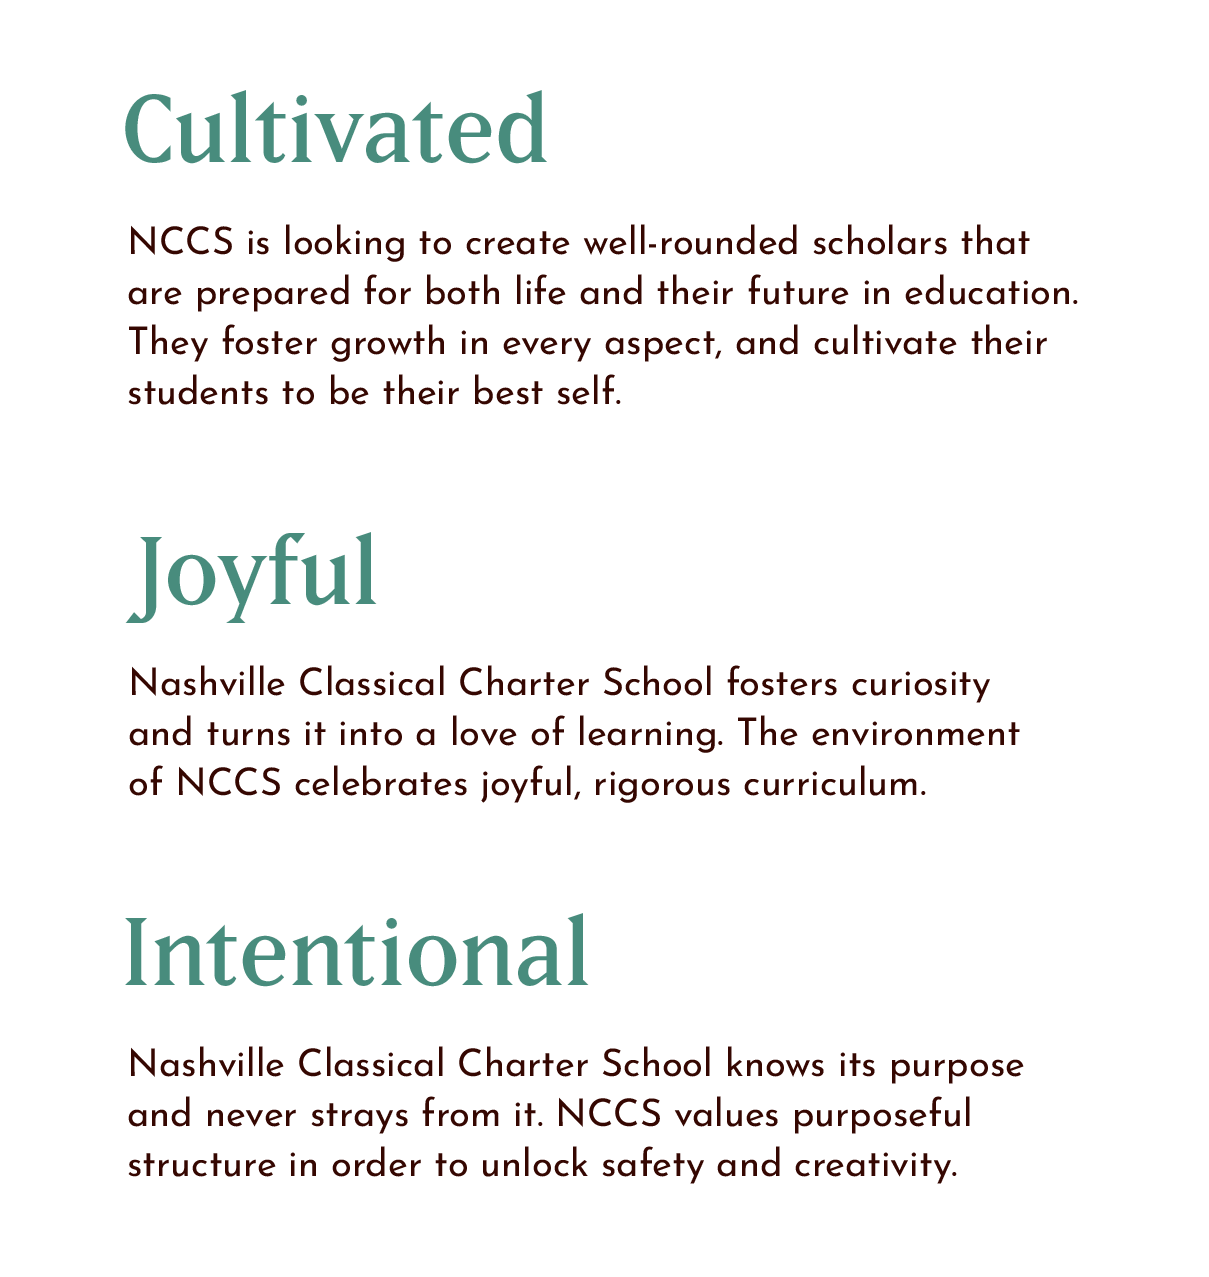 NCCS brand attributes determined in ST8MNT's brand refresh. The two listed here read: 